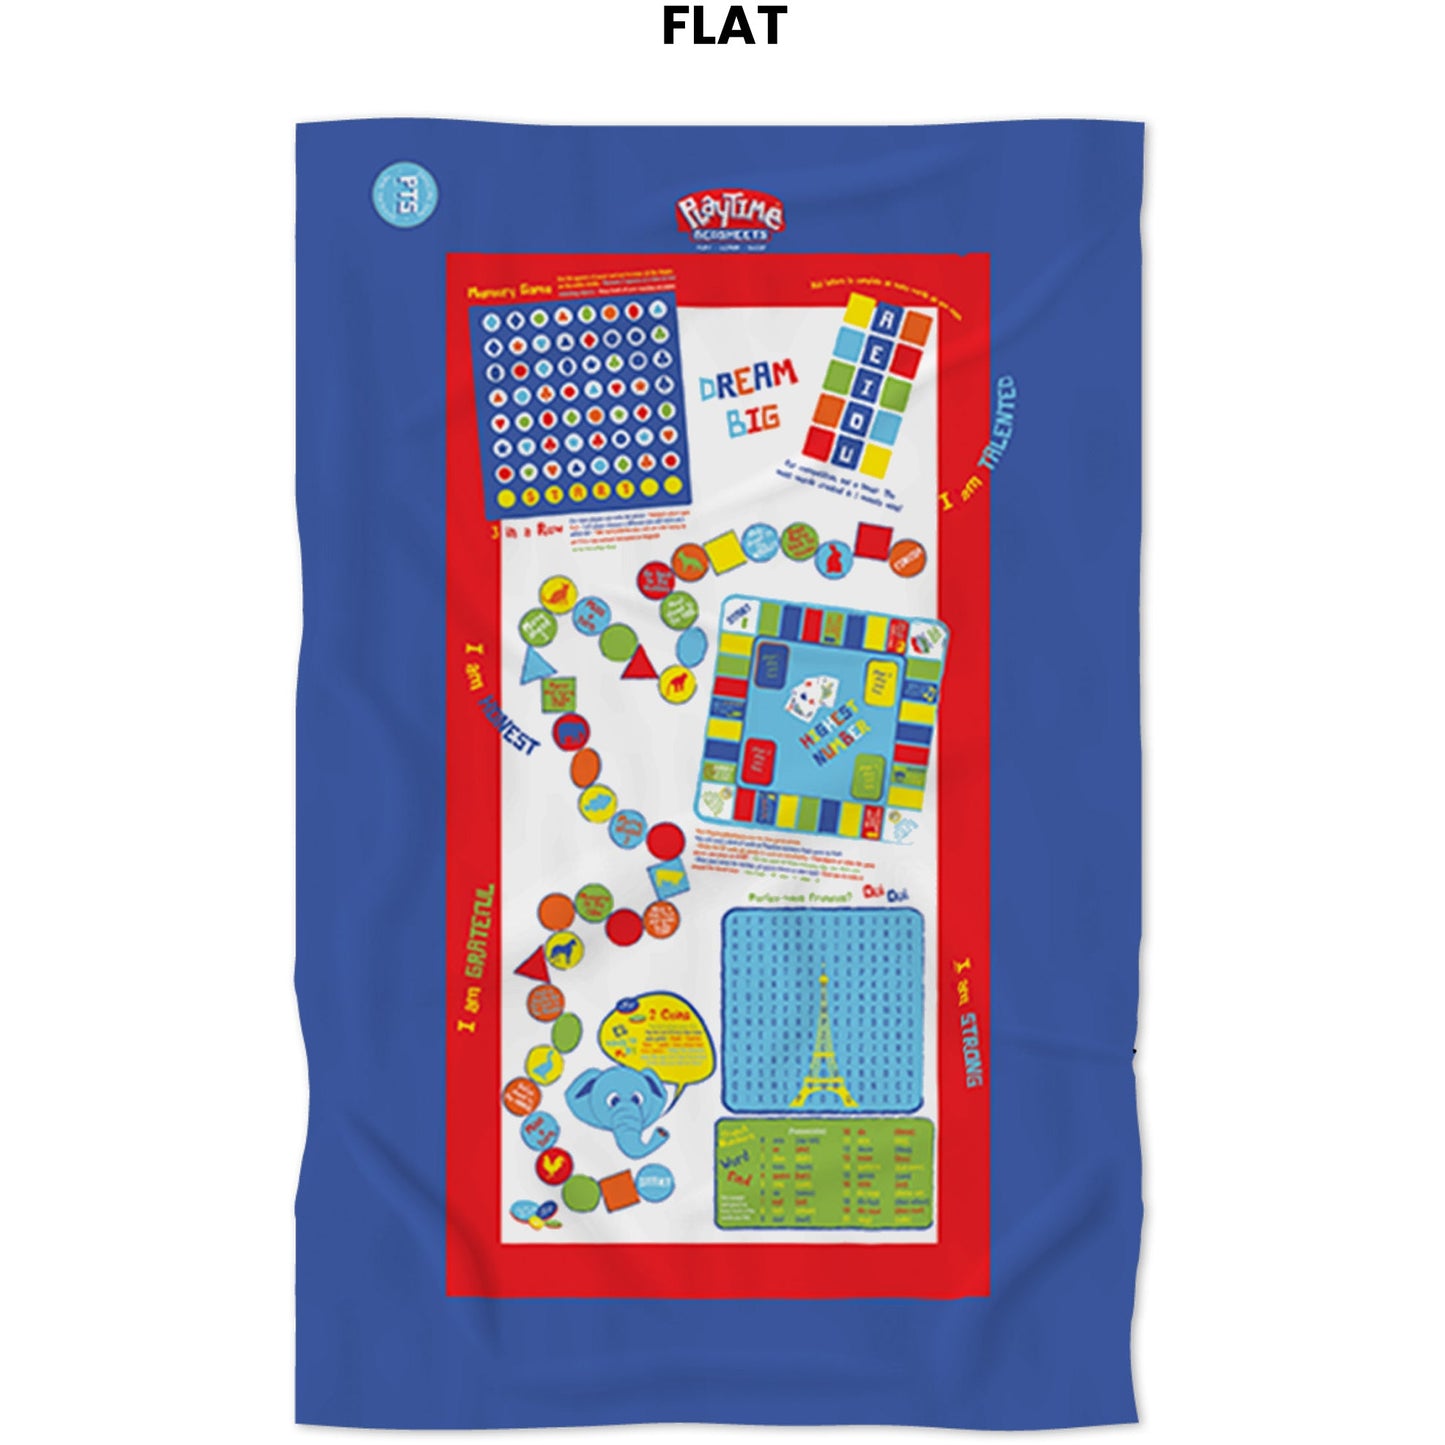 Playtime Bed Sheets Twin Blue - 3 PCs Cozy Super Soft - Breathable & Fade Resistant Microfiber Sheets - Has Over 65 Fun Printed Games & Puzzles -12inch Deep Pockets.